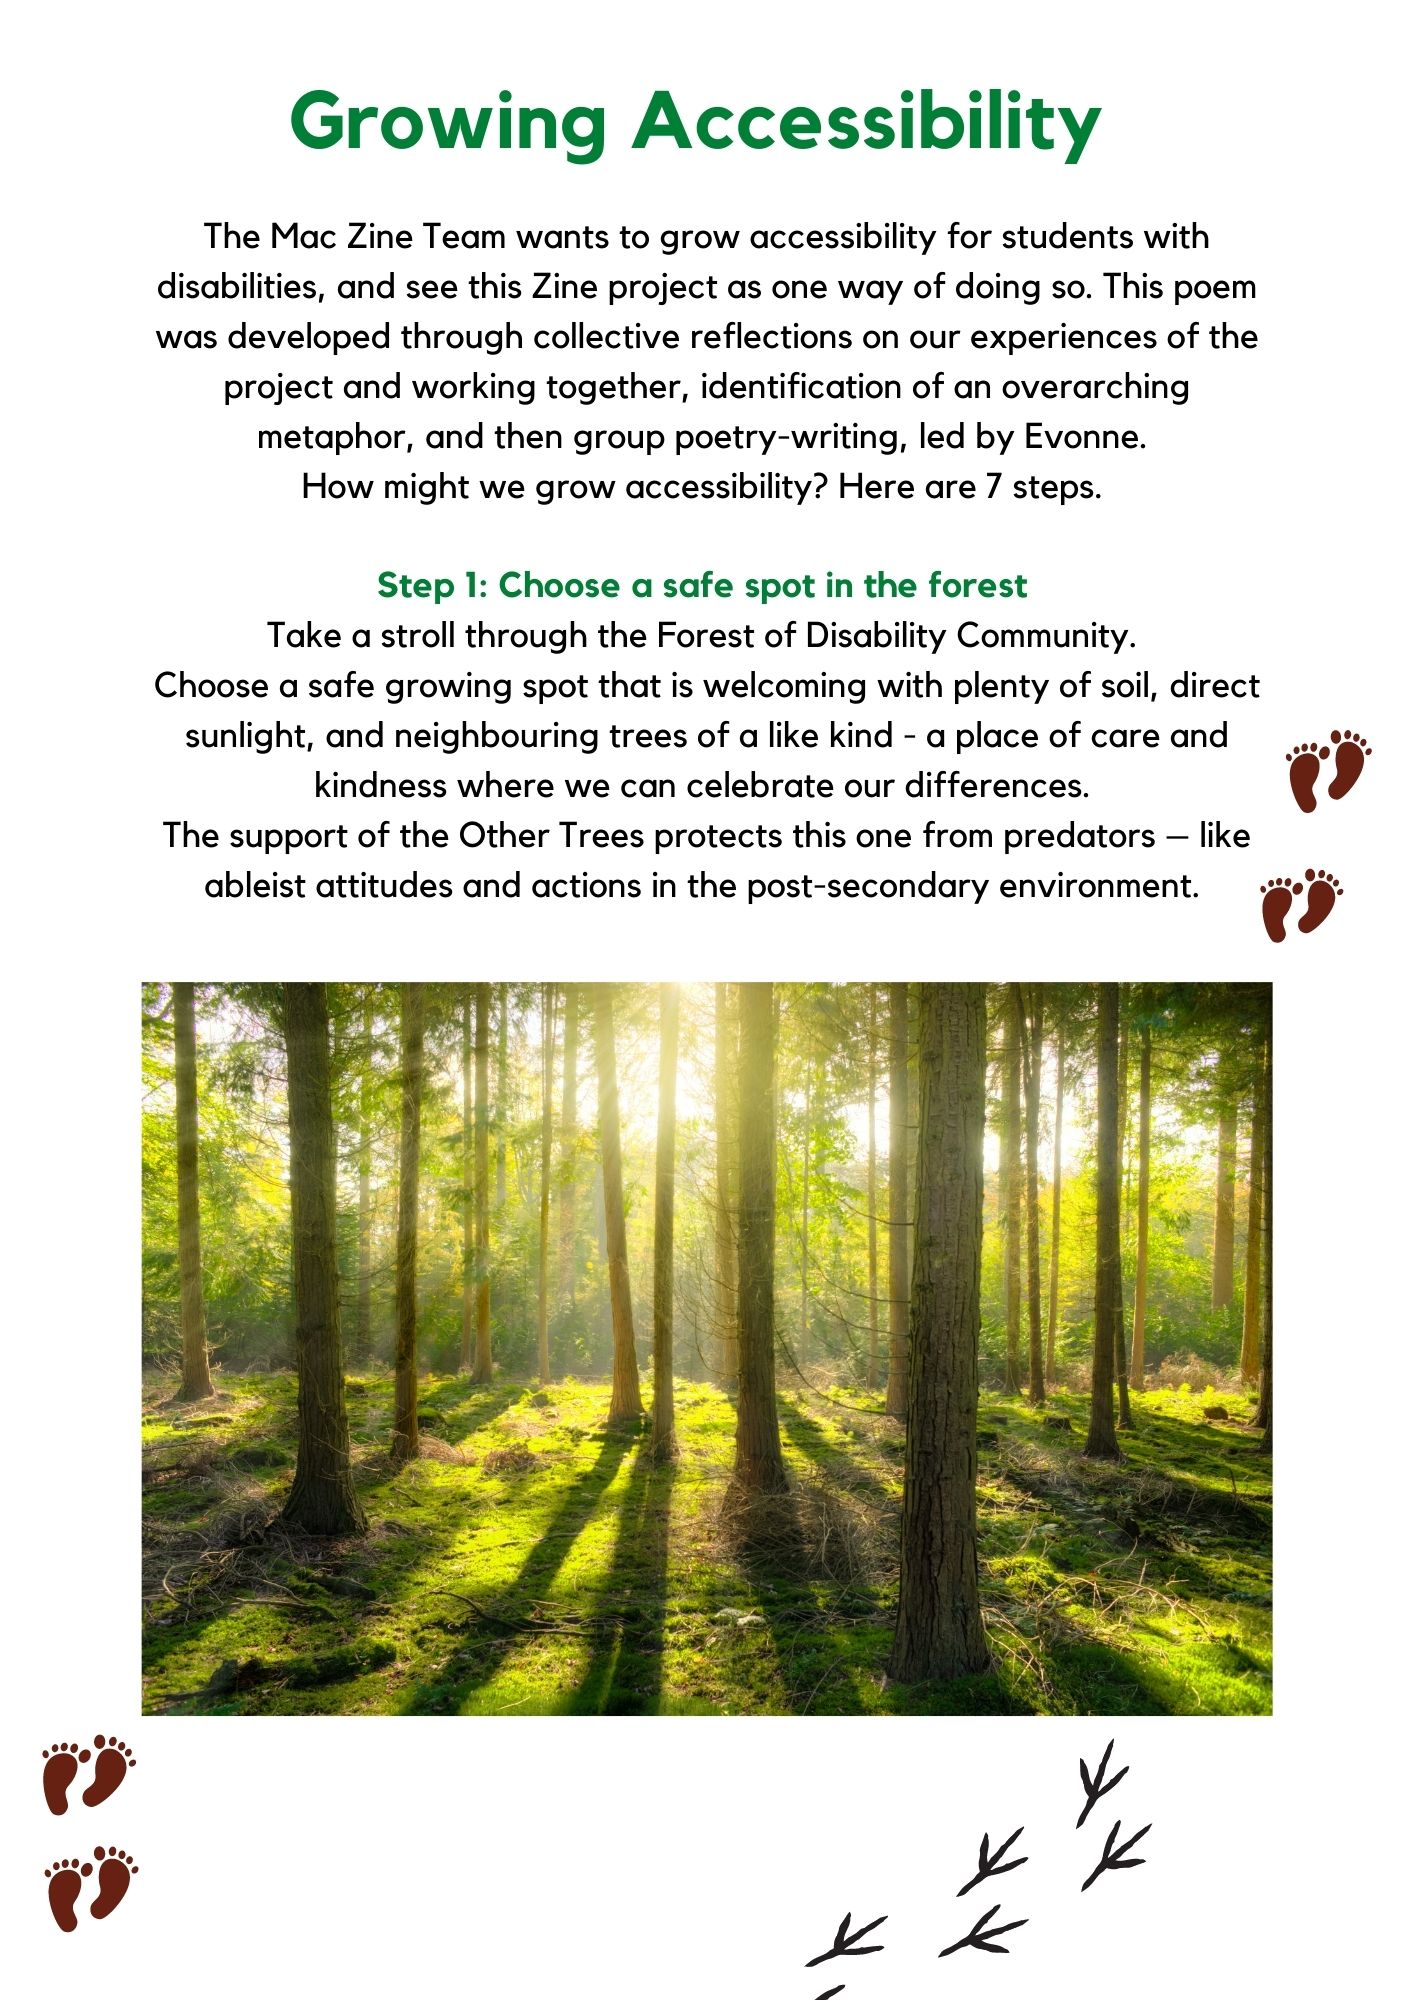 Image contains the introduction to the poem and step one of growing accessibility. Visual elements include cartoon human footprints and bird footprints, as well as a photograph of a forest with many trees and mossy undergrowth.